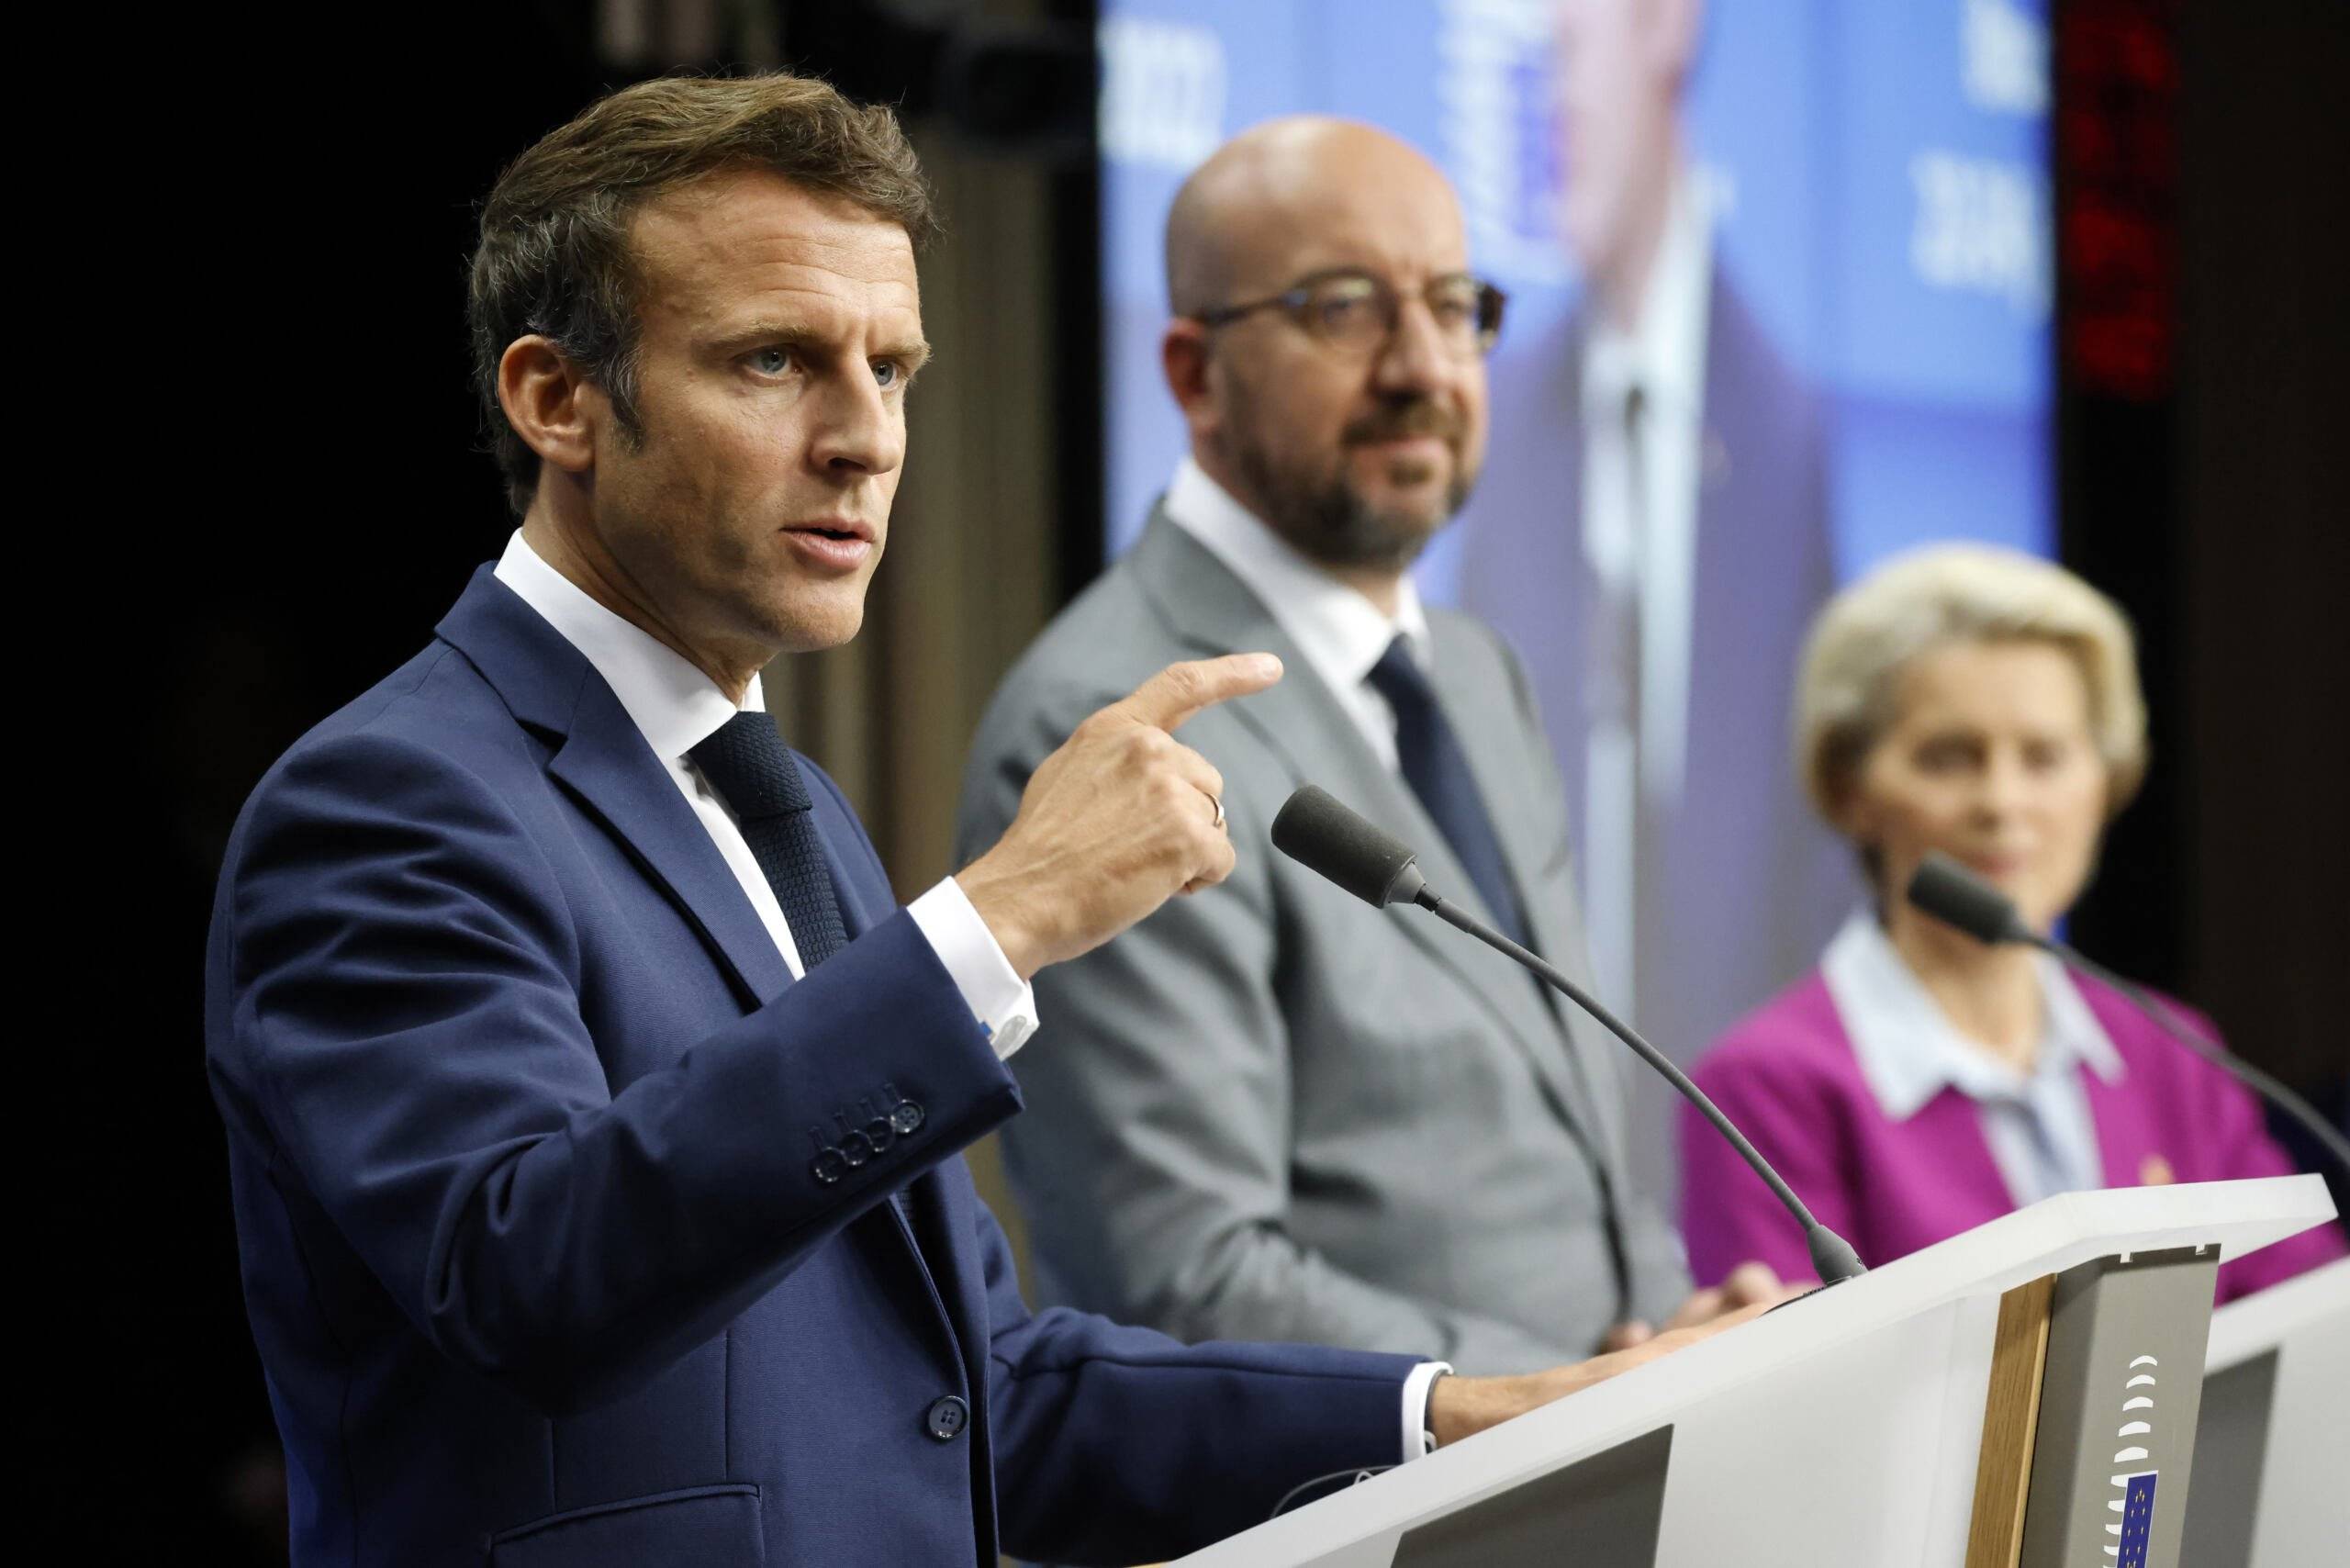 France's President Emmanuel Macron (L) gives a press conference with President of the European Council Charles Michel (C) and President of the European Commission Ursula von der Leyen at The European Council Building in Brussels on June 24, 2022. (Photo by Ludovic MARIN / AFP)